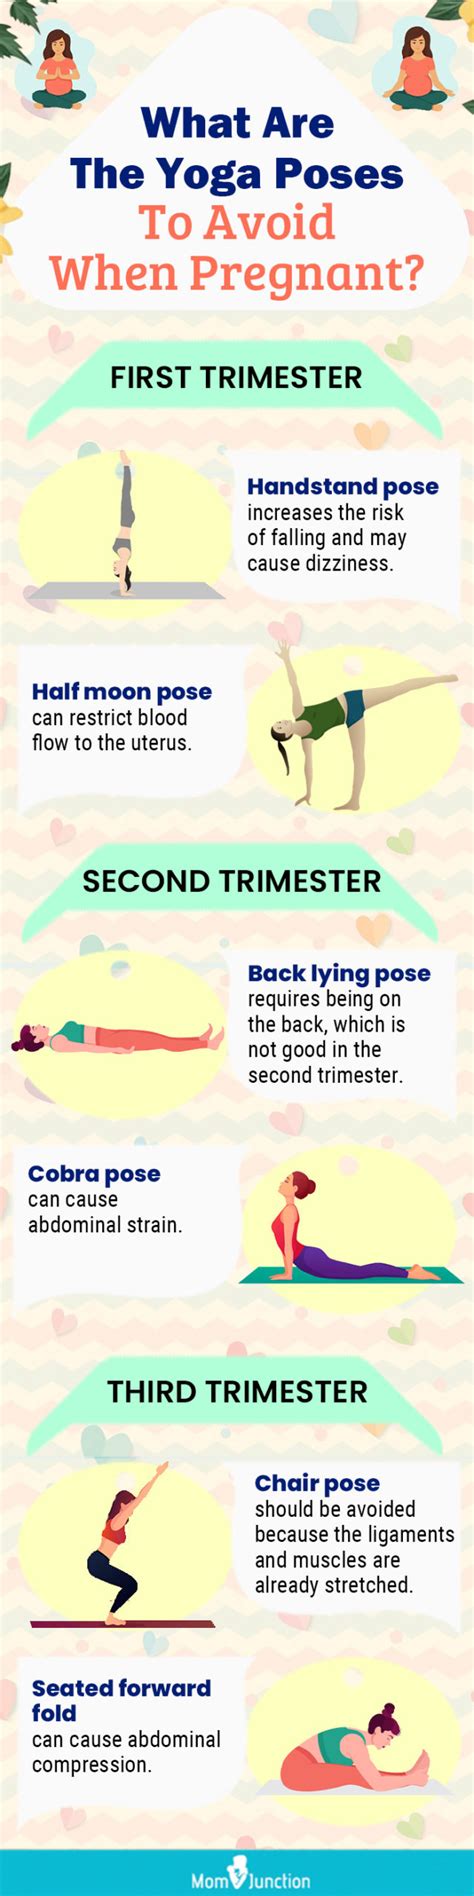 12 Different Yoga Poses To Avoid When Pregnant